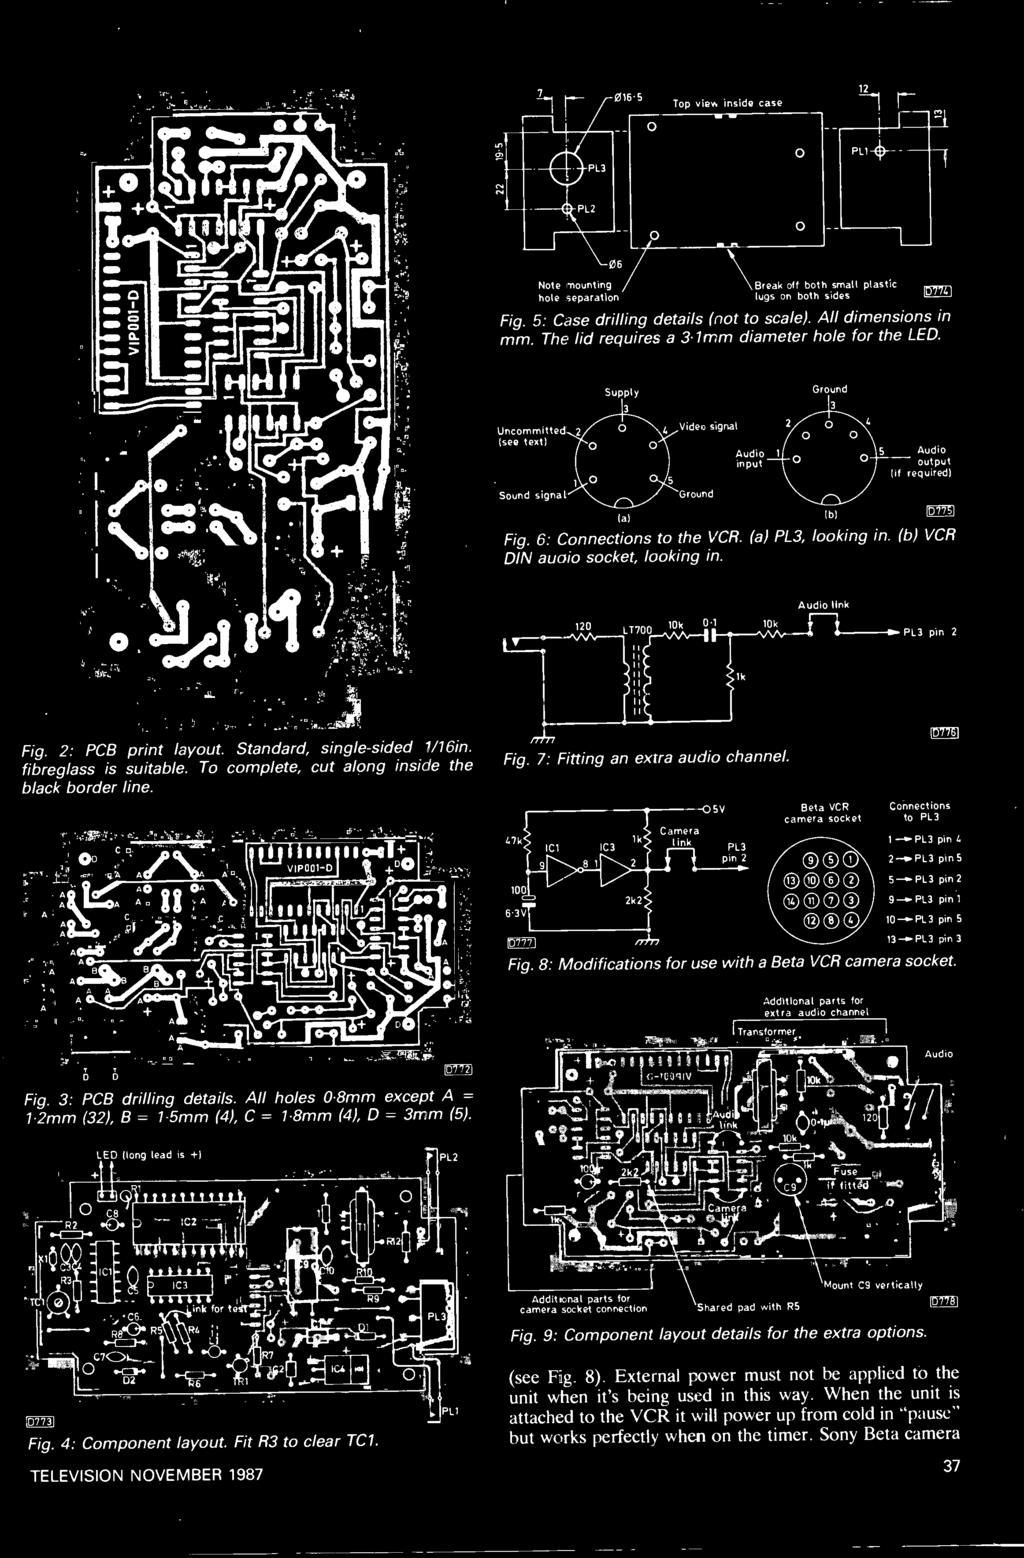 6: Connections to the VCR. (a) PL3, looking in. (b) VCR DIN audio socket, looking in. Audio link 120 LT700 10k Oil 10k PL3 pin 2 1k Fig. 2: PCB print layout. Standard, single -sided 1/16in.